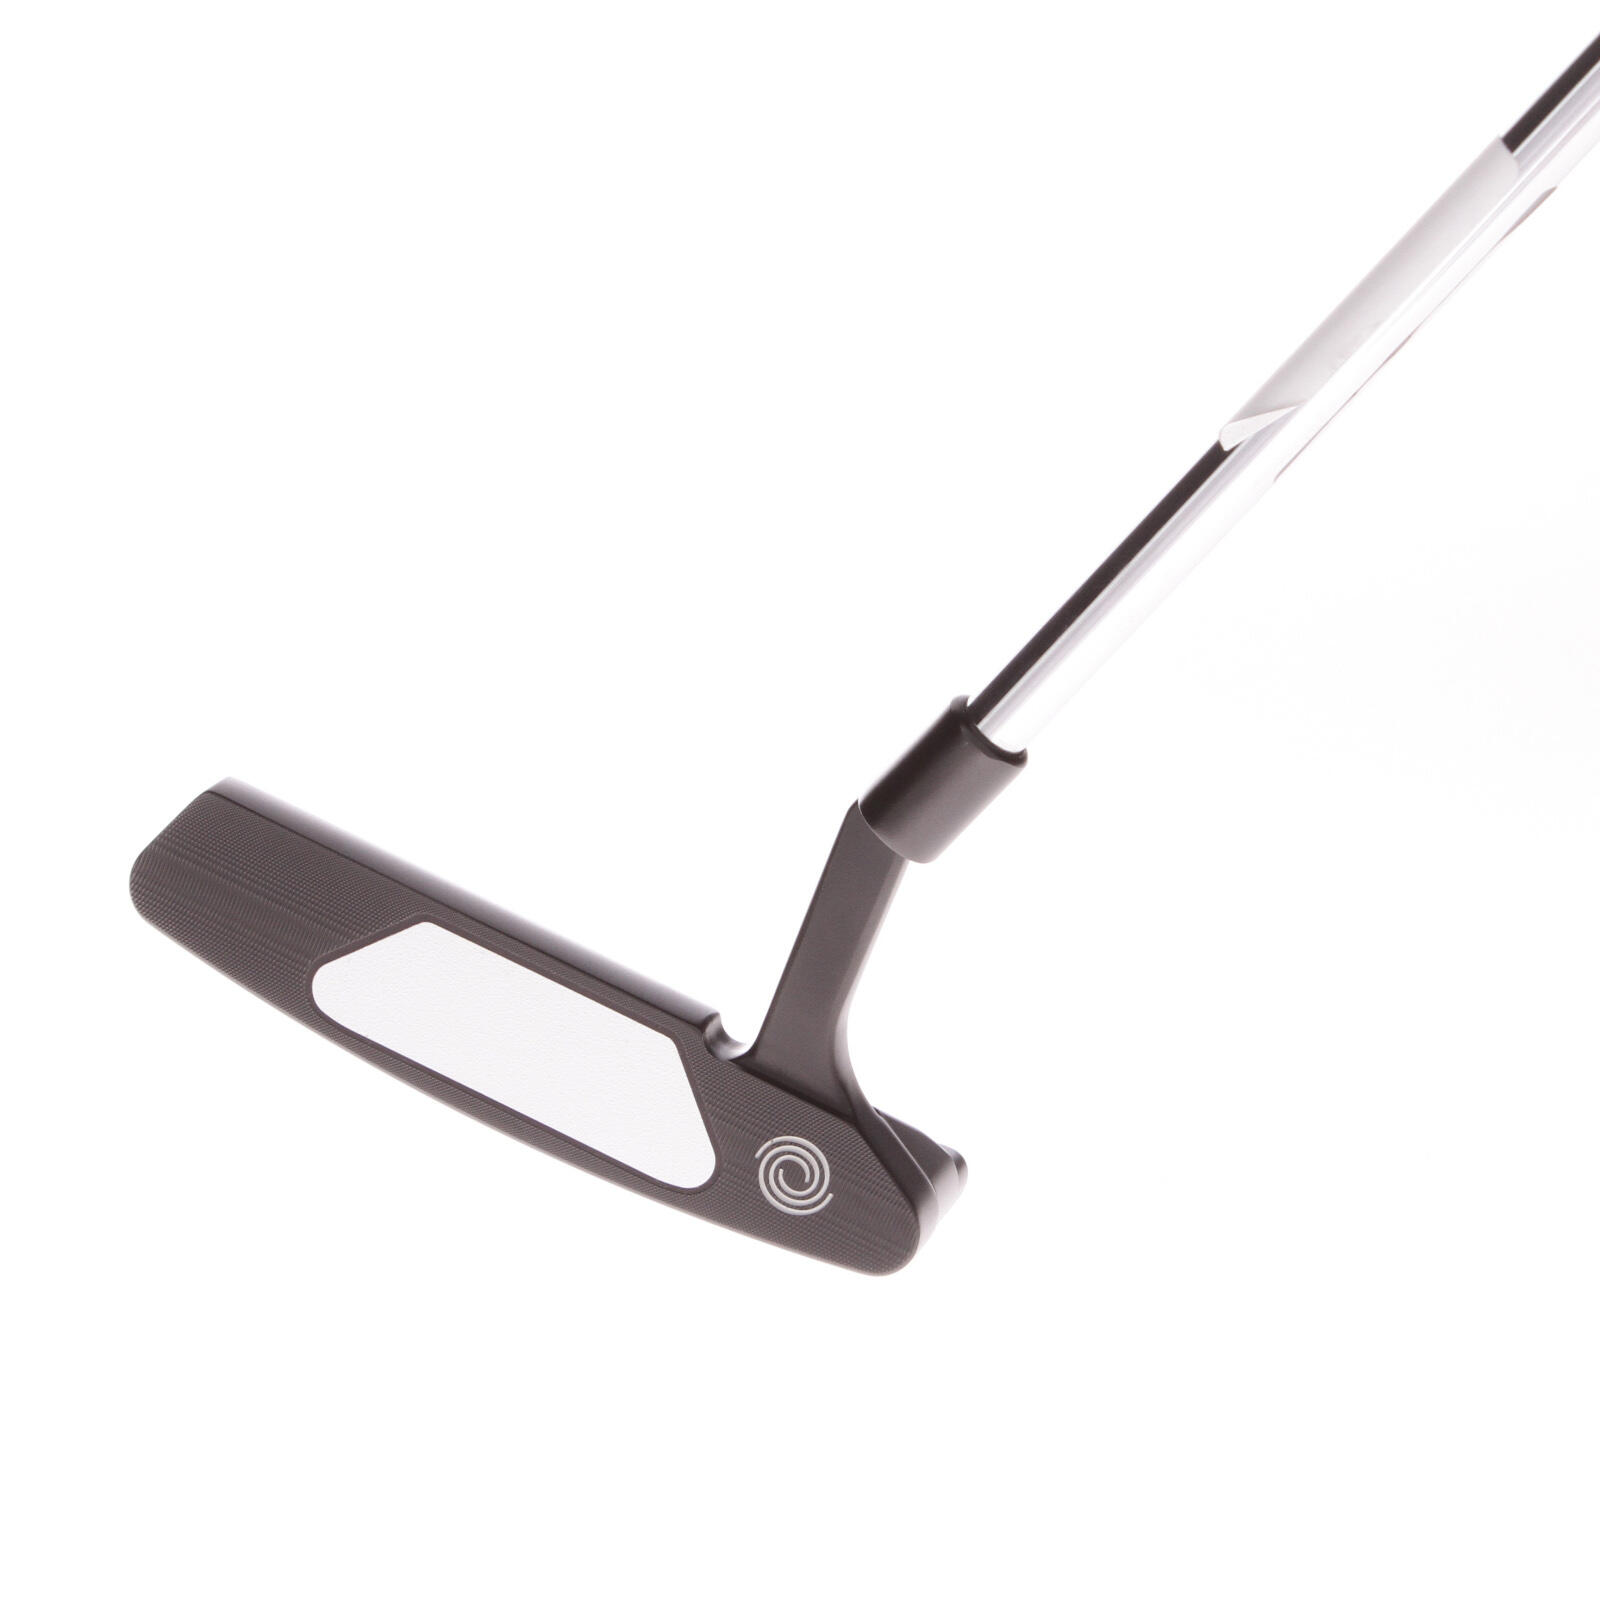 USED - Odyssey Tri-Hot 5K Two Putter 31.5 Inches Length Graphite Shaft - GRADE B 4/7